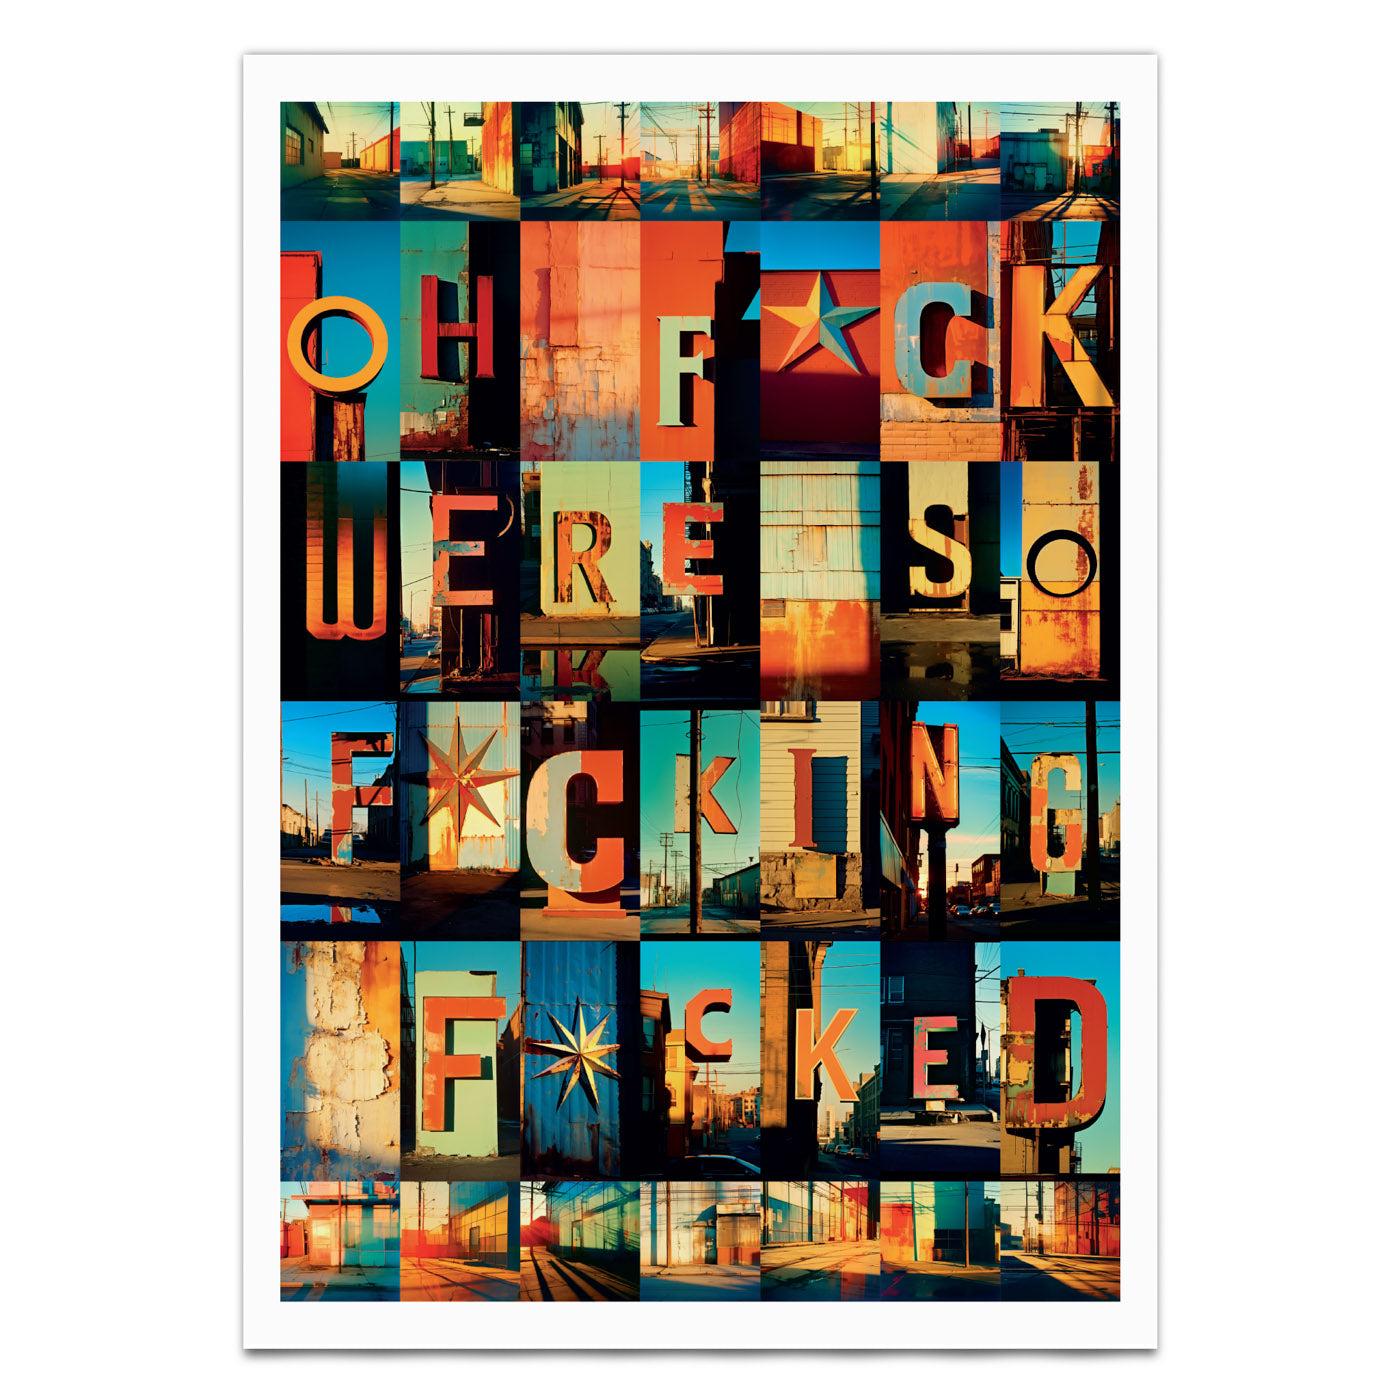 'The State of the World' Bleakly Humorous Print - 'Oh Fuck, We're So Fucking Fucked'